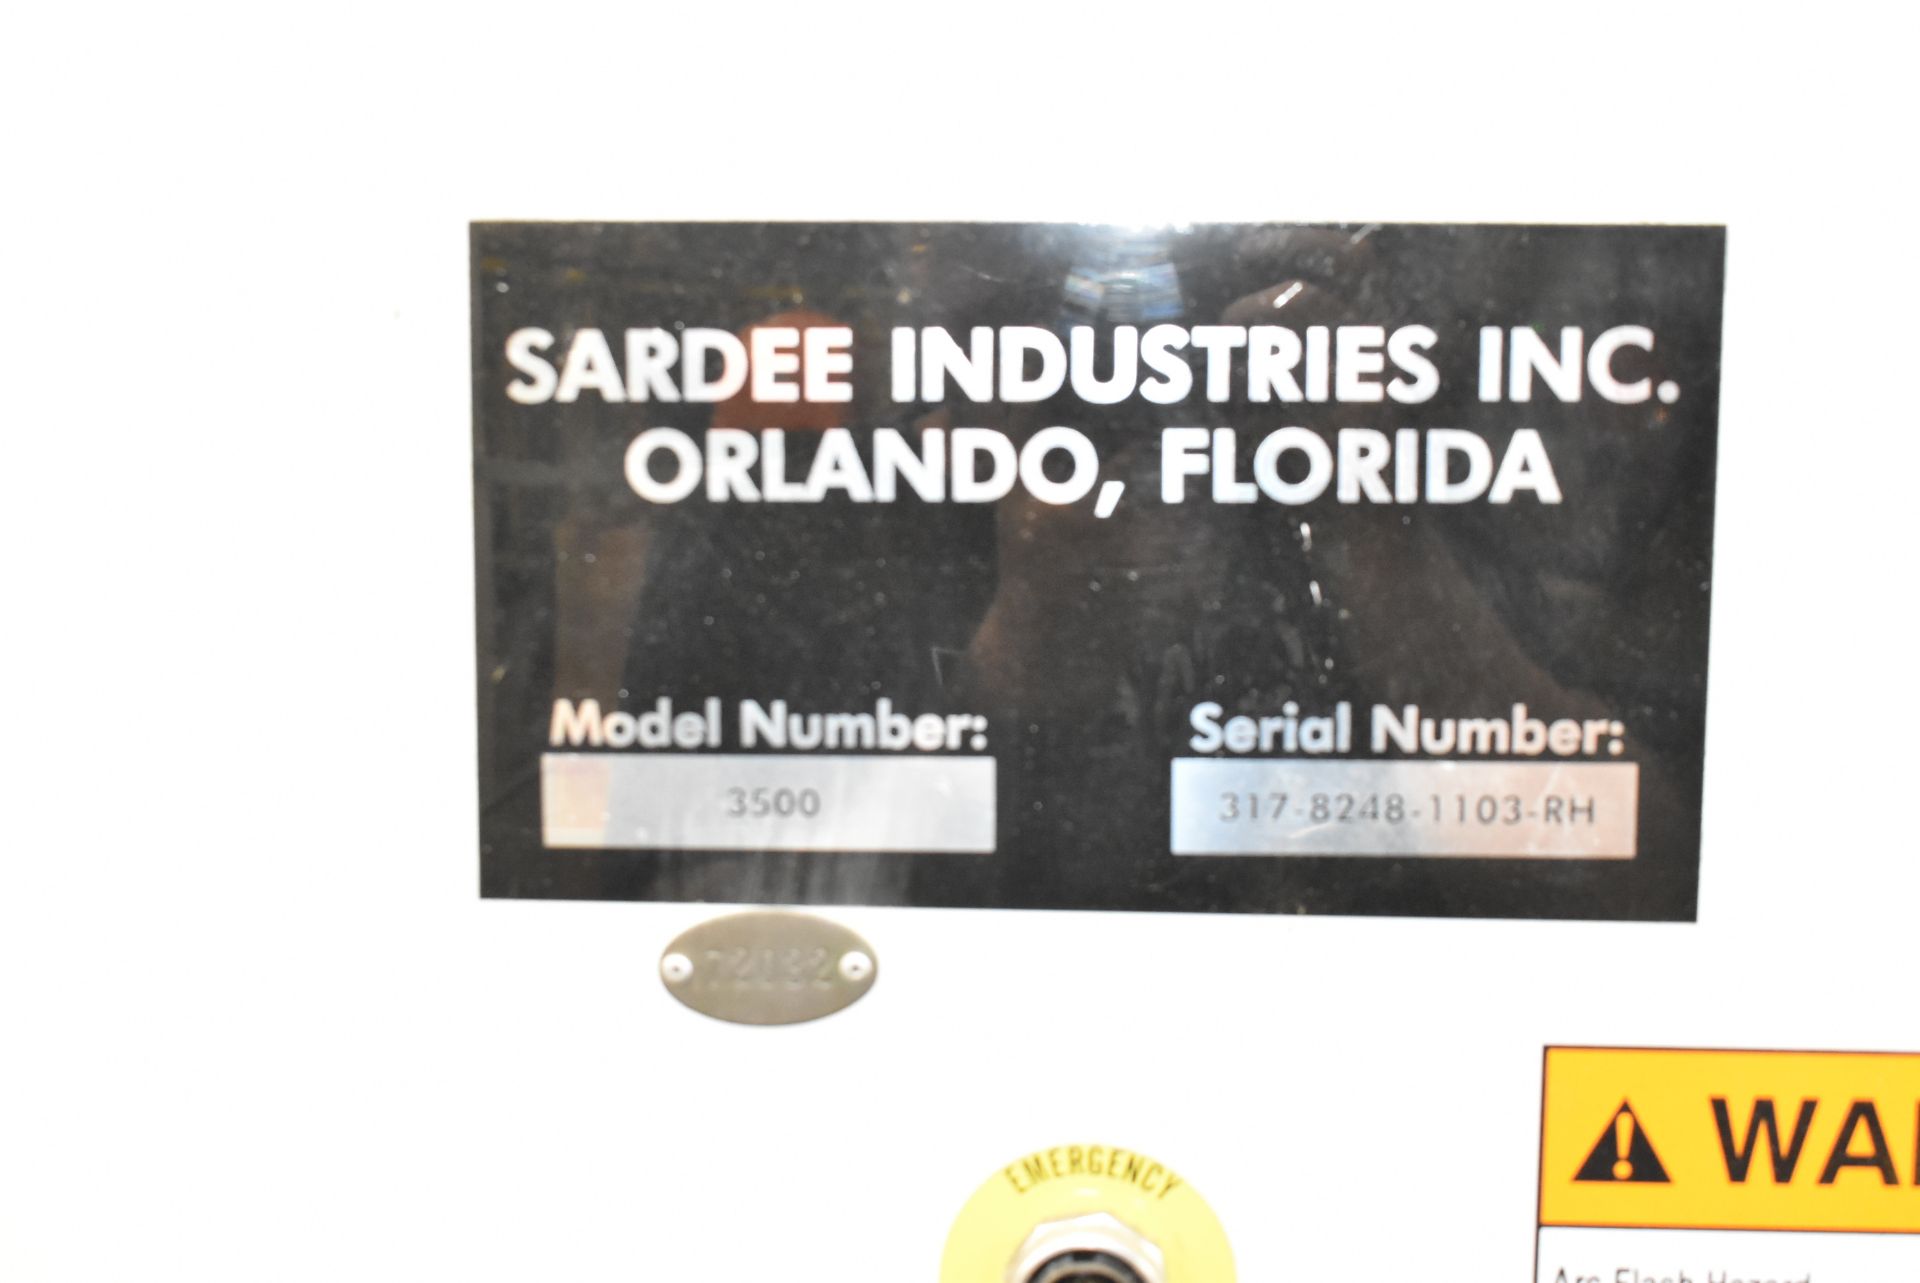 SARDEE INDUSTRIES 3500 PALLETIZER WITH ALLEN BRADLEY PANEL VIEW 600 TOUCH SCREEN CONTROL, BANNER - Image 21 of 27